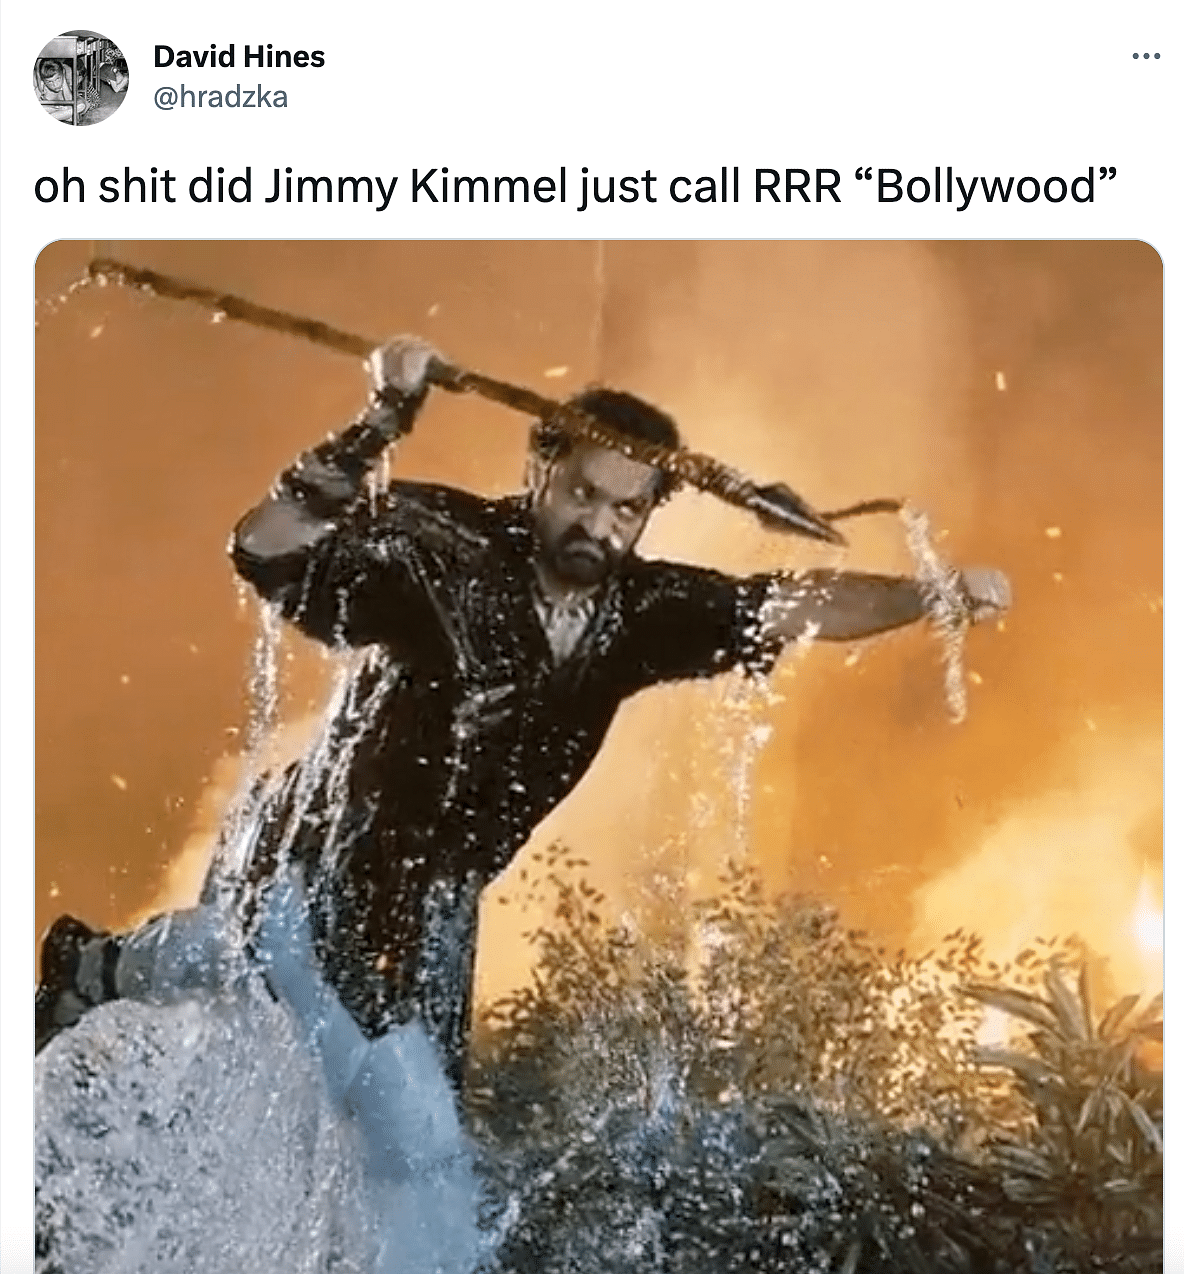 Netizens quickly pointed out that 'RRR' is a Telugu-language movie, and not a Bollywood film.